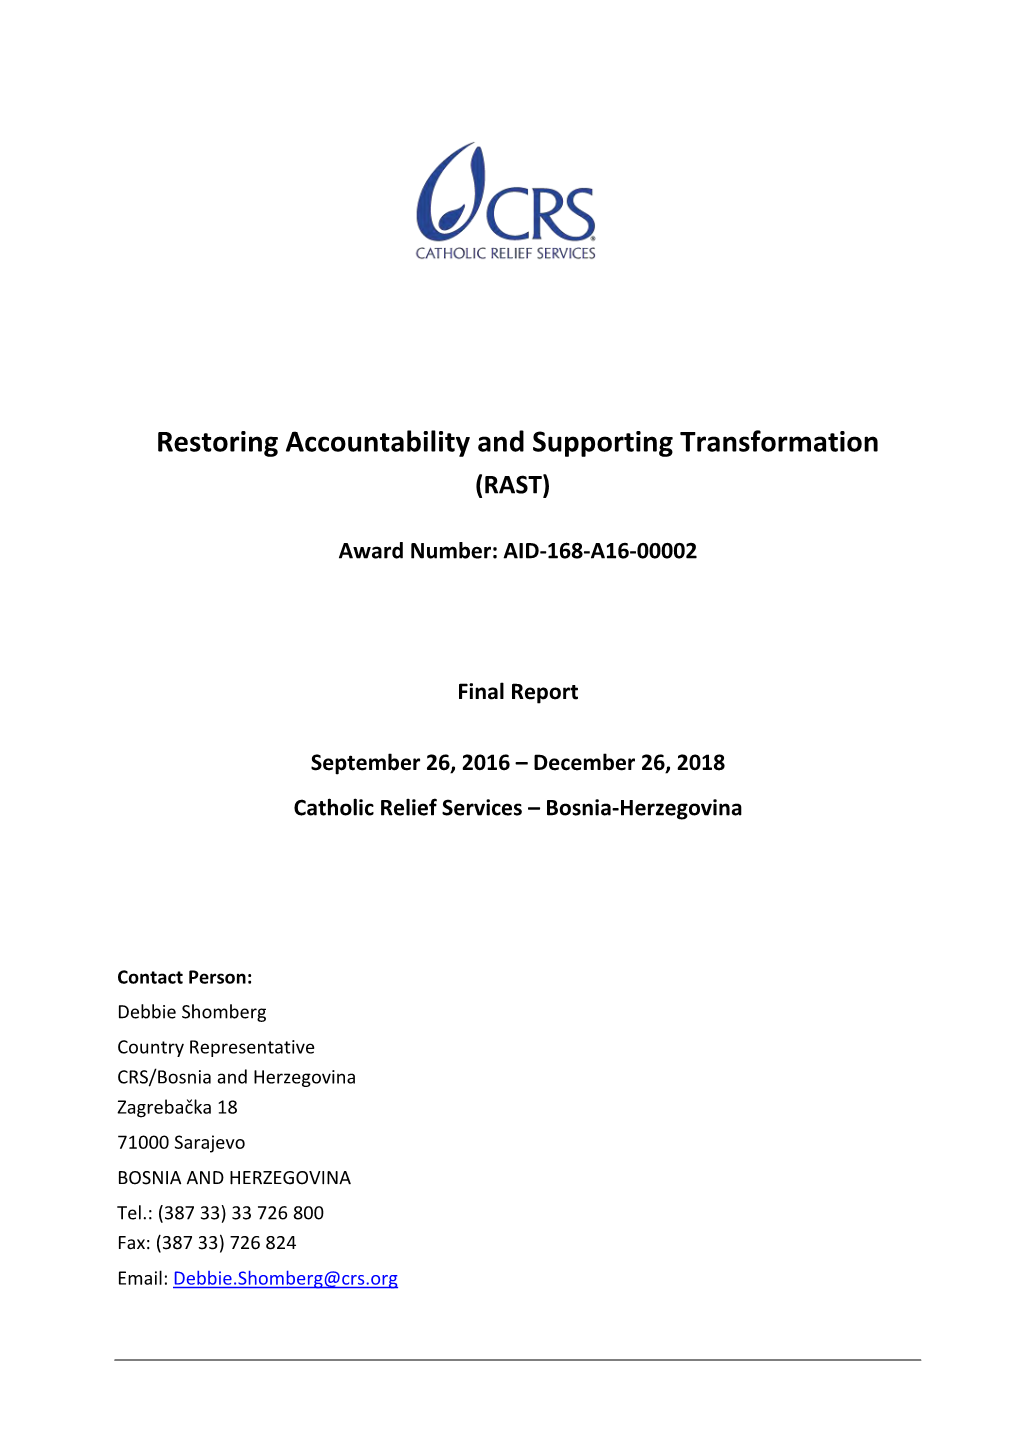 Restoring Accountability and Supporting Transformation (RAST)